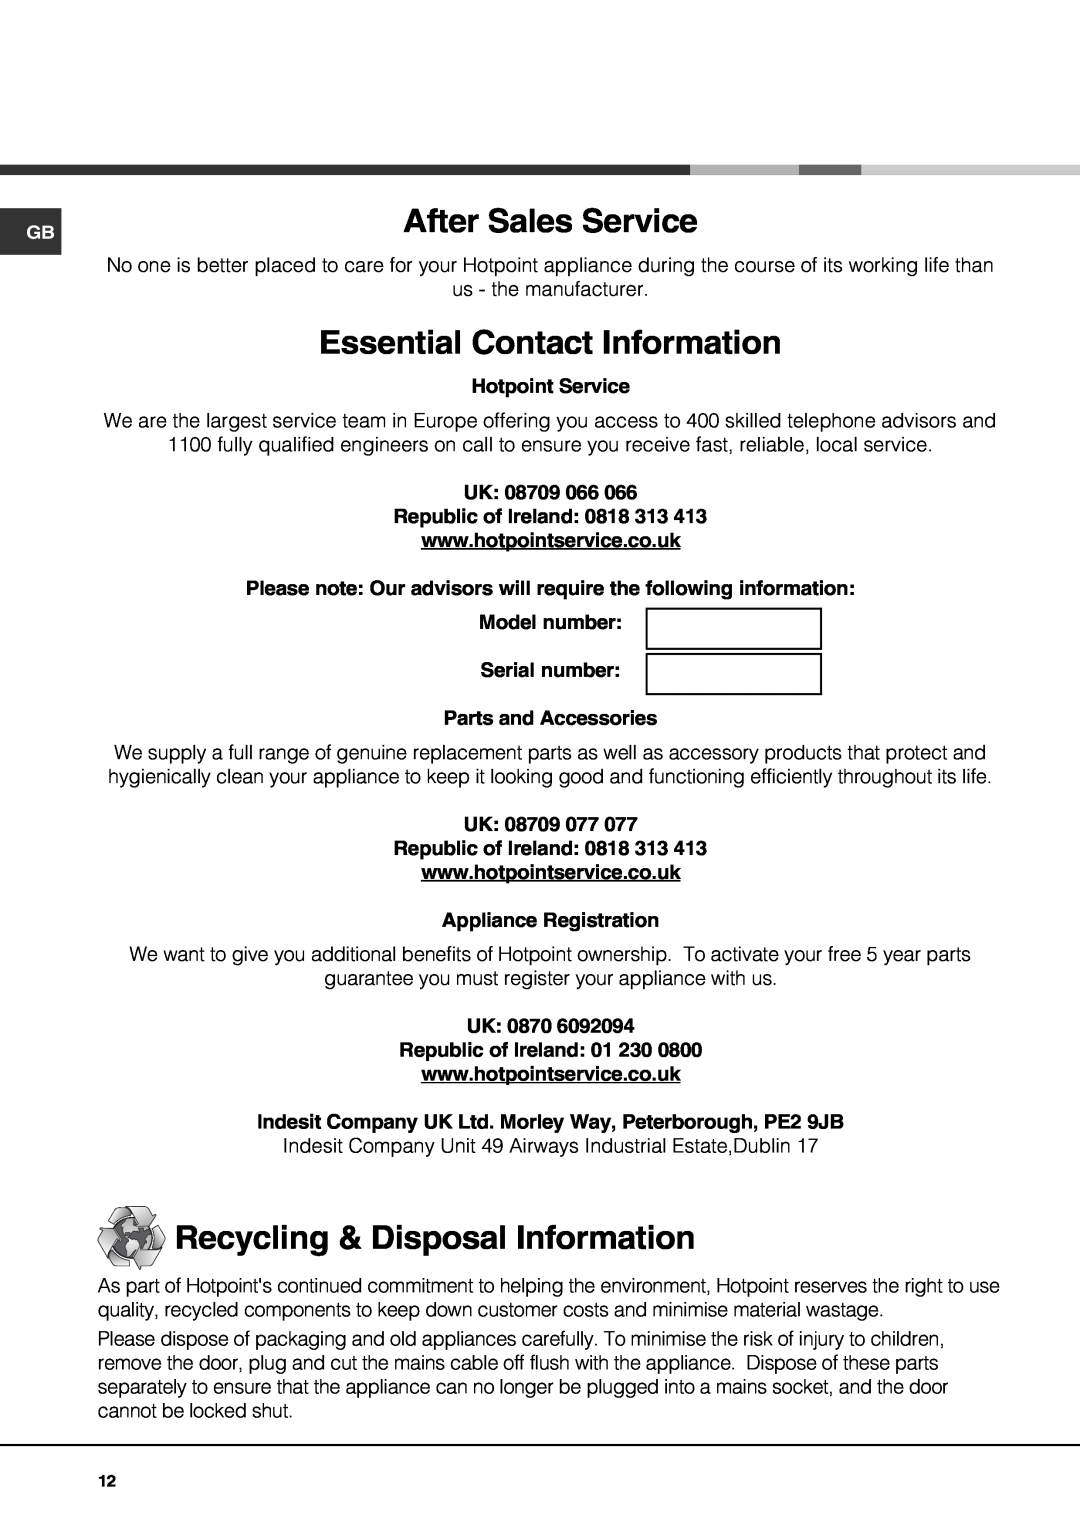 Hotpoint G640T specifications After Sales Service, Essential Contact Information, Recycling & Disposal Information 